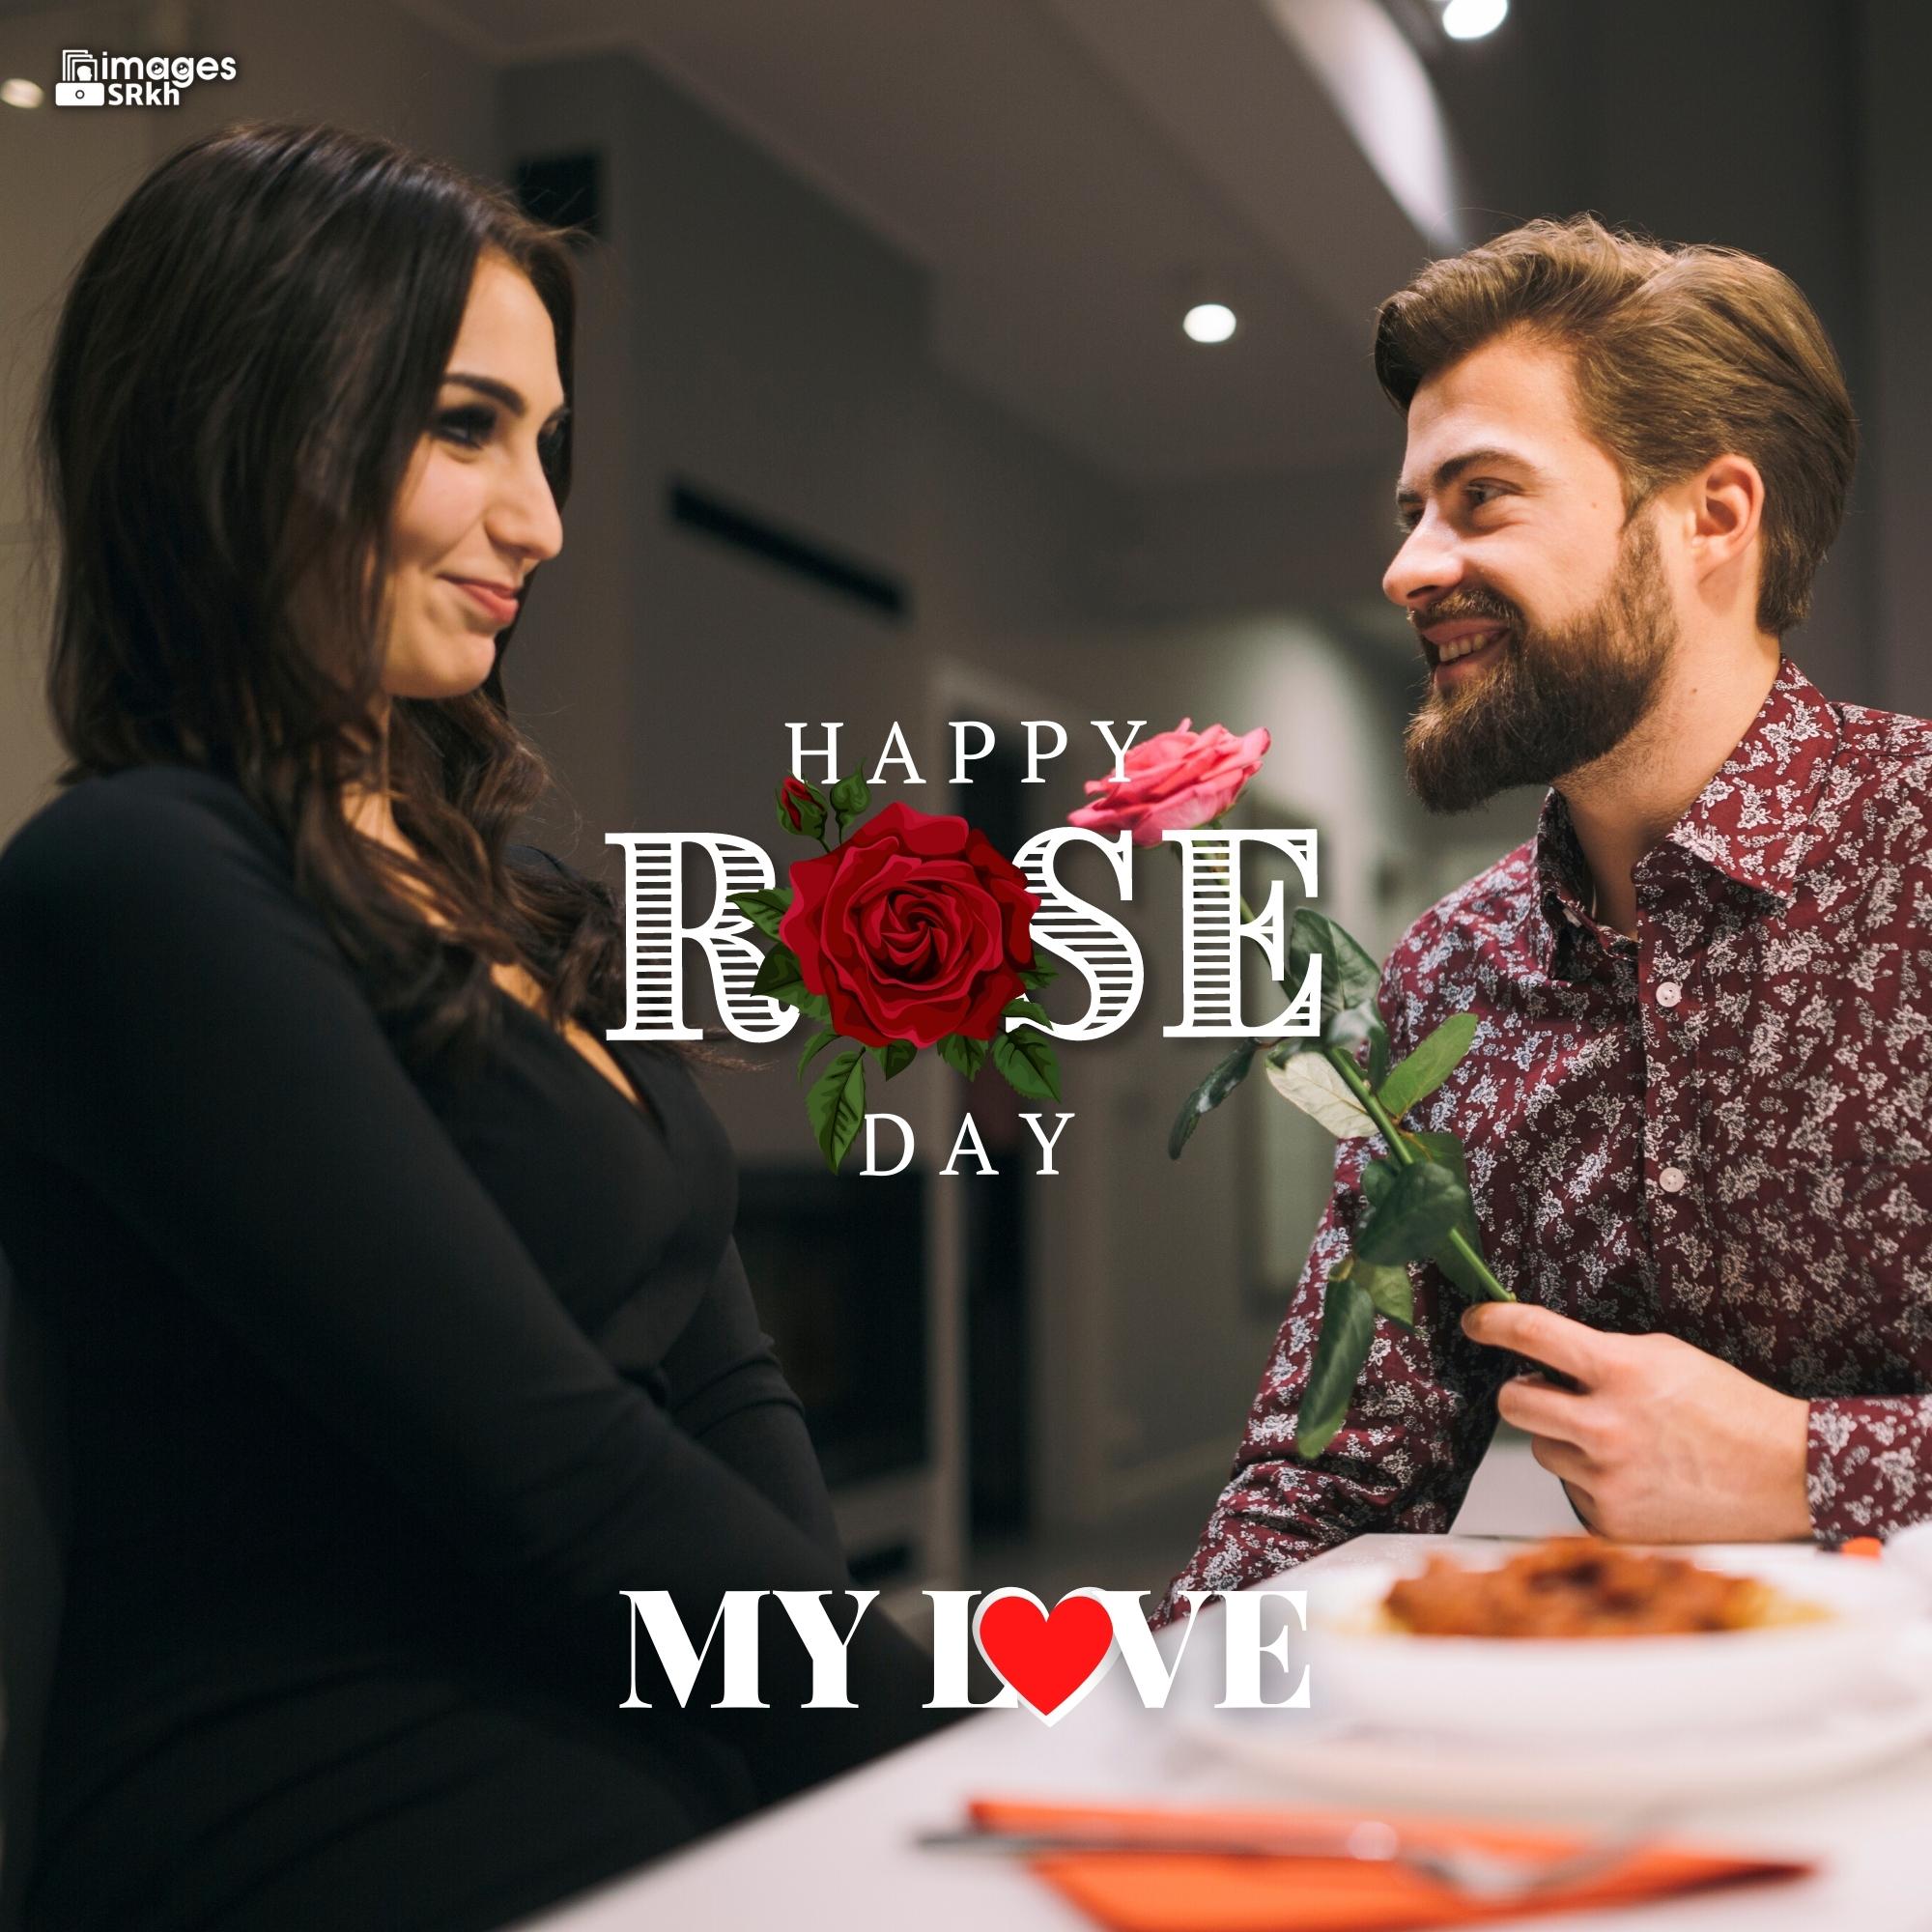 Happy Rose Day My Love (33) | HD IMAGES